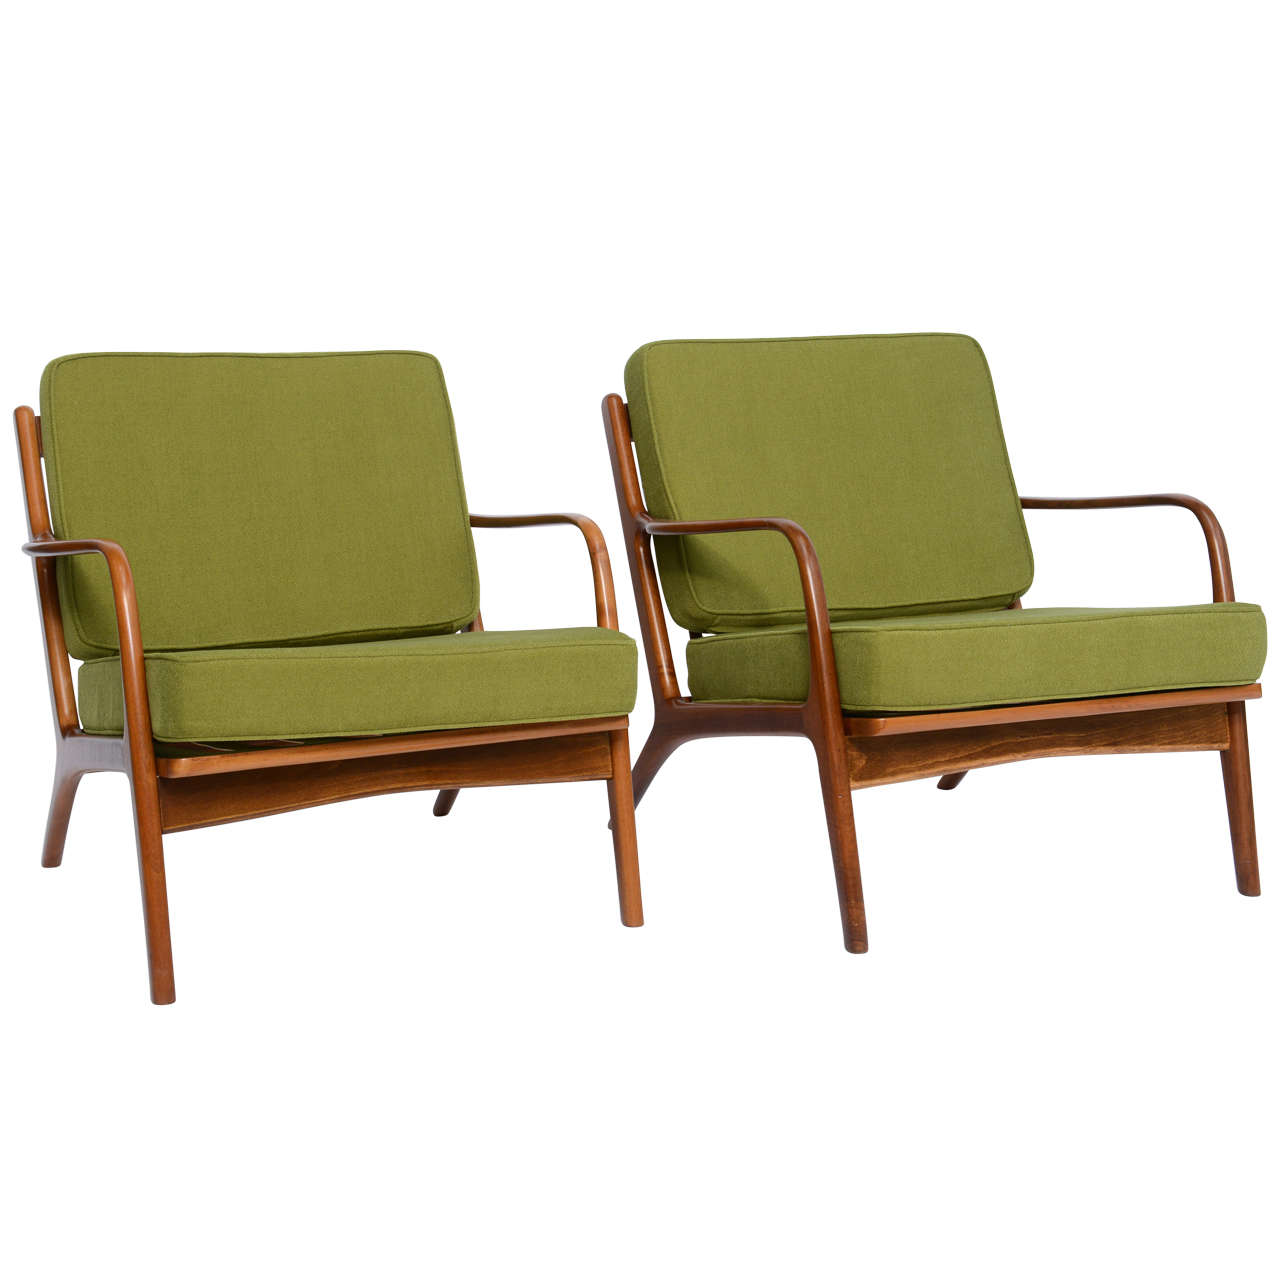 SOLD  SOLD  PAIR of beautiful Danish walnut armchairs attributed to Ib Kofod Larsen with sculptural arms, spindle back and new loose cushions upholstered in martini olive green boucle fabric.  Newly restored, they are a delight.

Price is for the